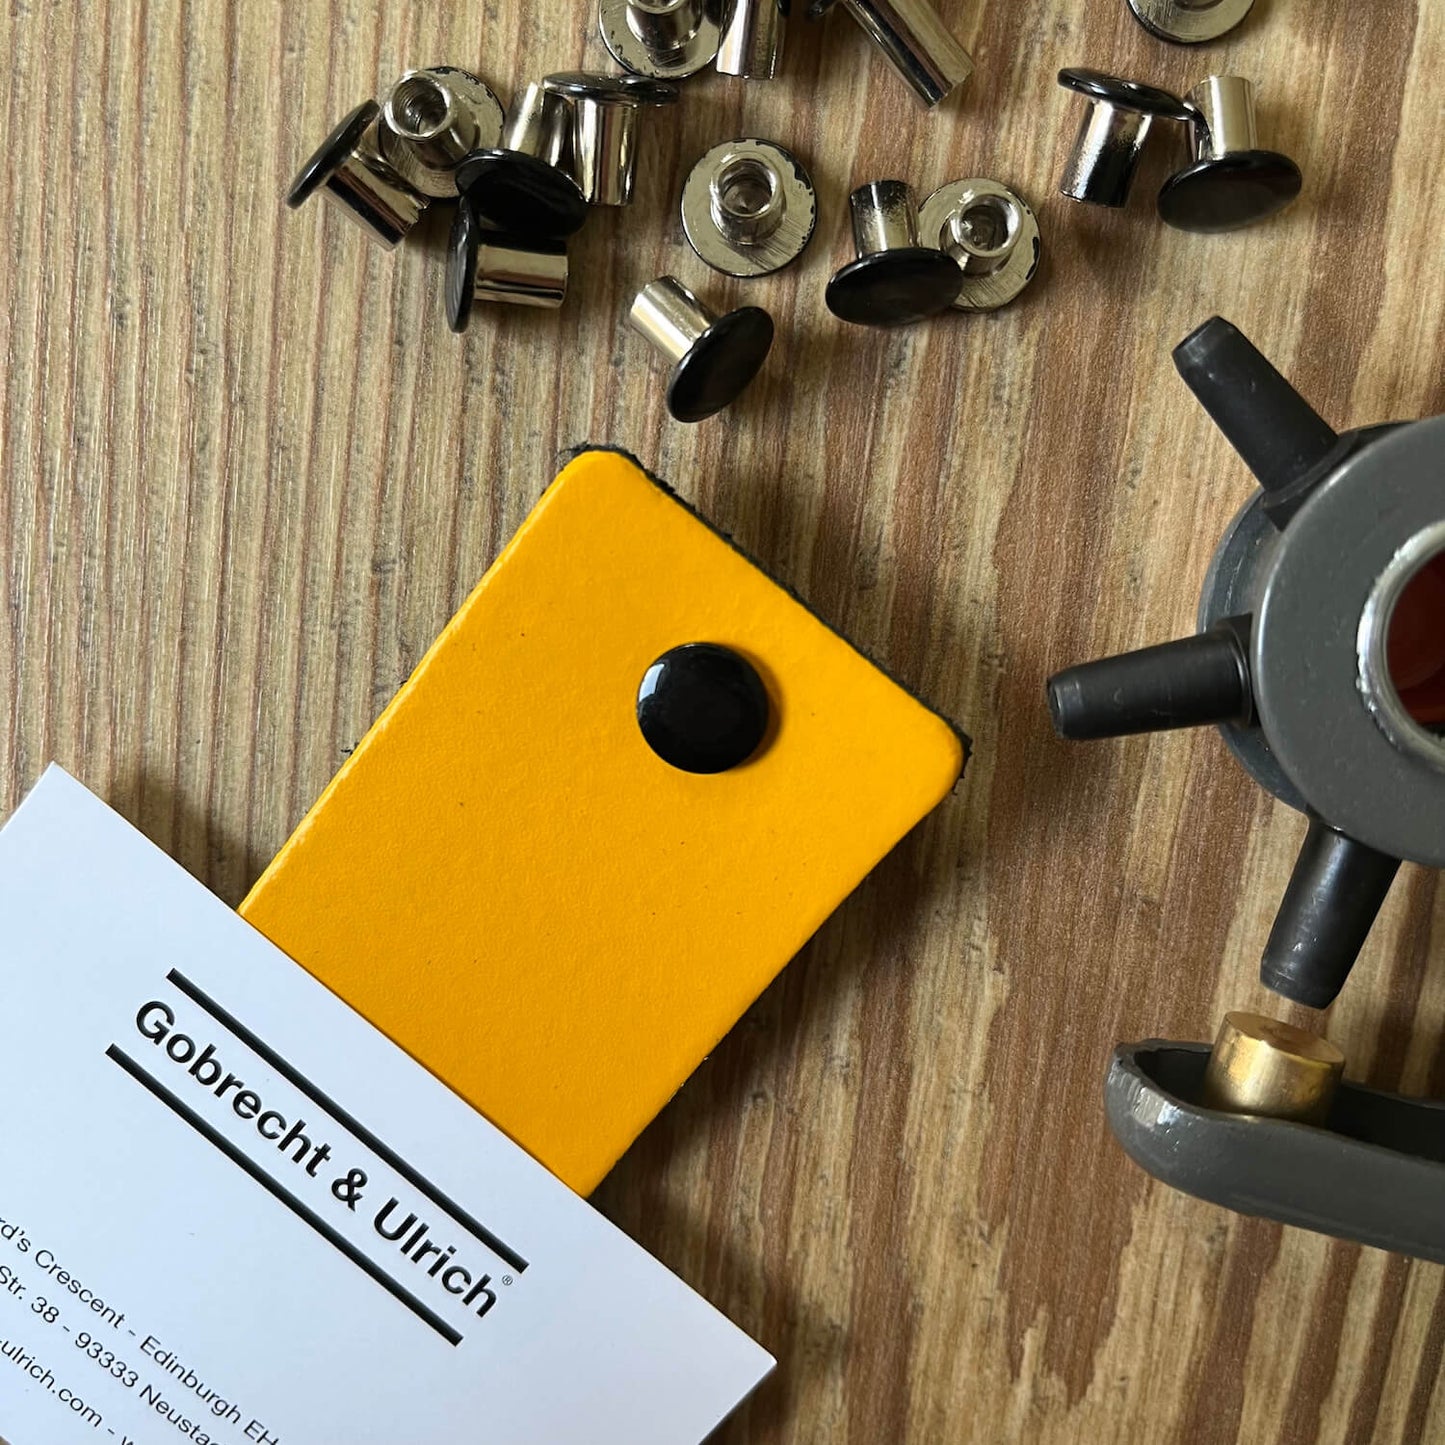 Black binding screws scattered on a wooden surface, a silver binding screw fastened to a piece of bright yellow leather, and a leather hole punch